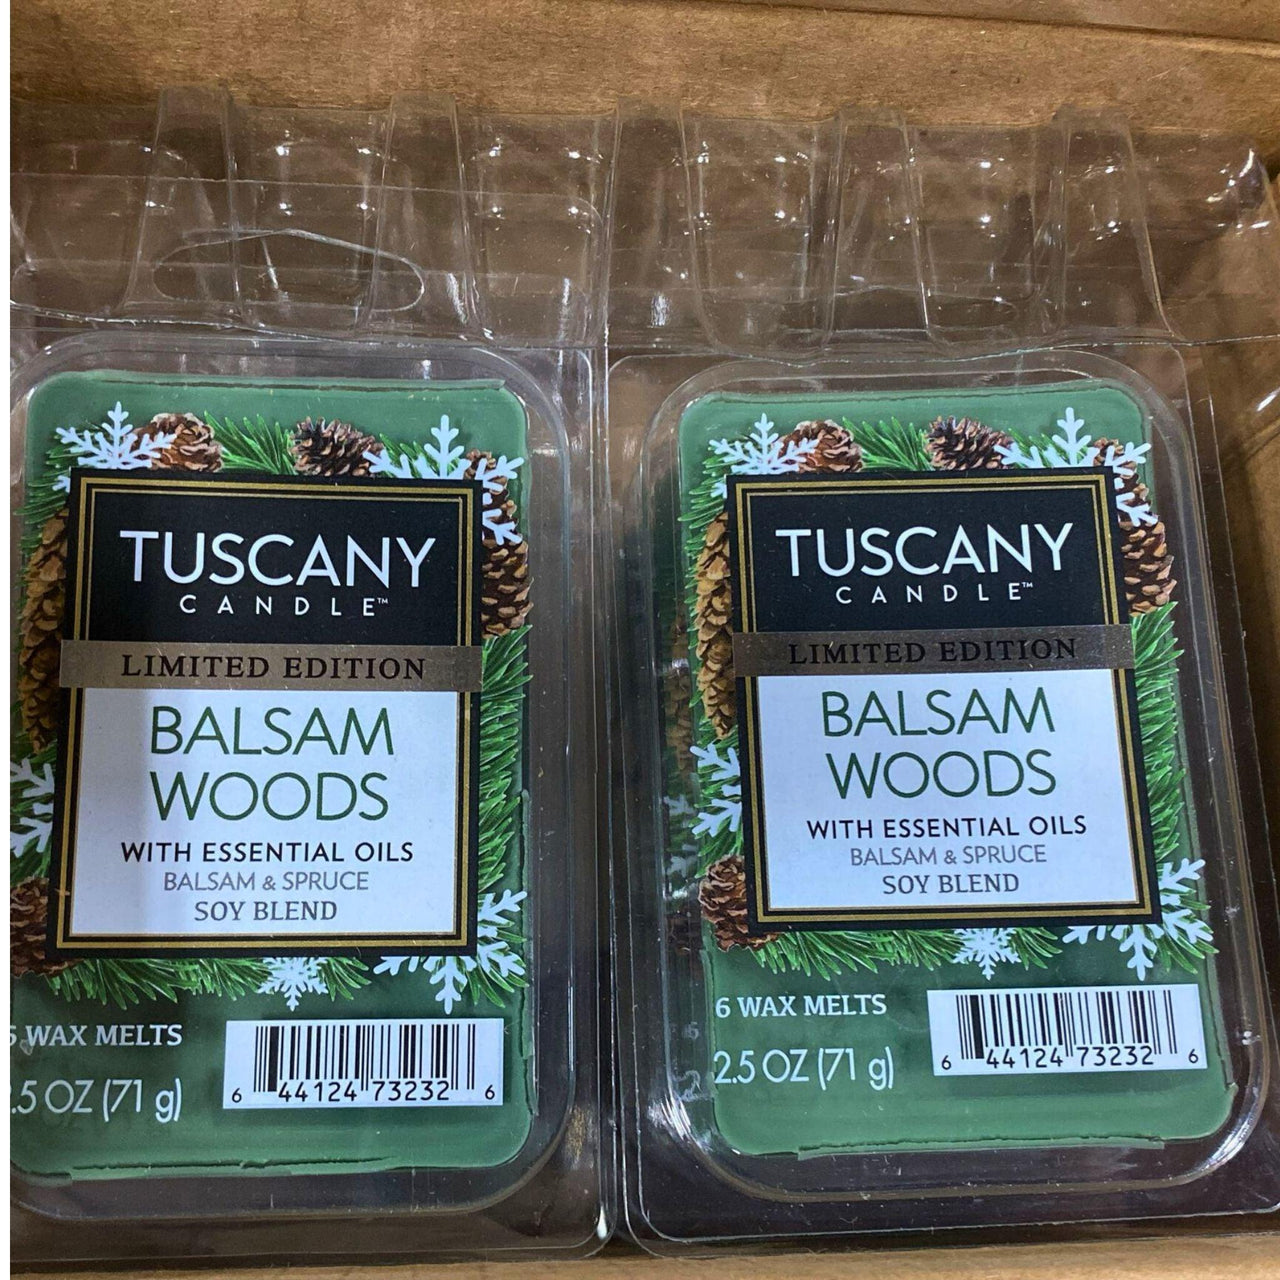 Tuscany Candle Limited Edition Balsam Woods with Essential Oils Balsam & Spruce Soy Blend 6 wax melts 2.5OZ (100 Pcs Lot) - Discount Wholesalers Inc